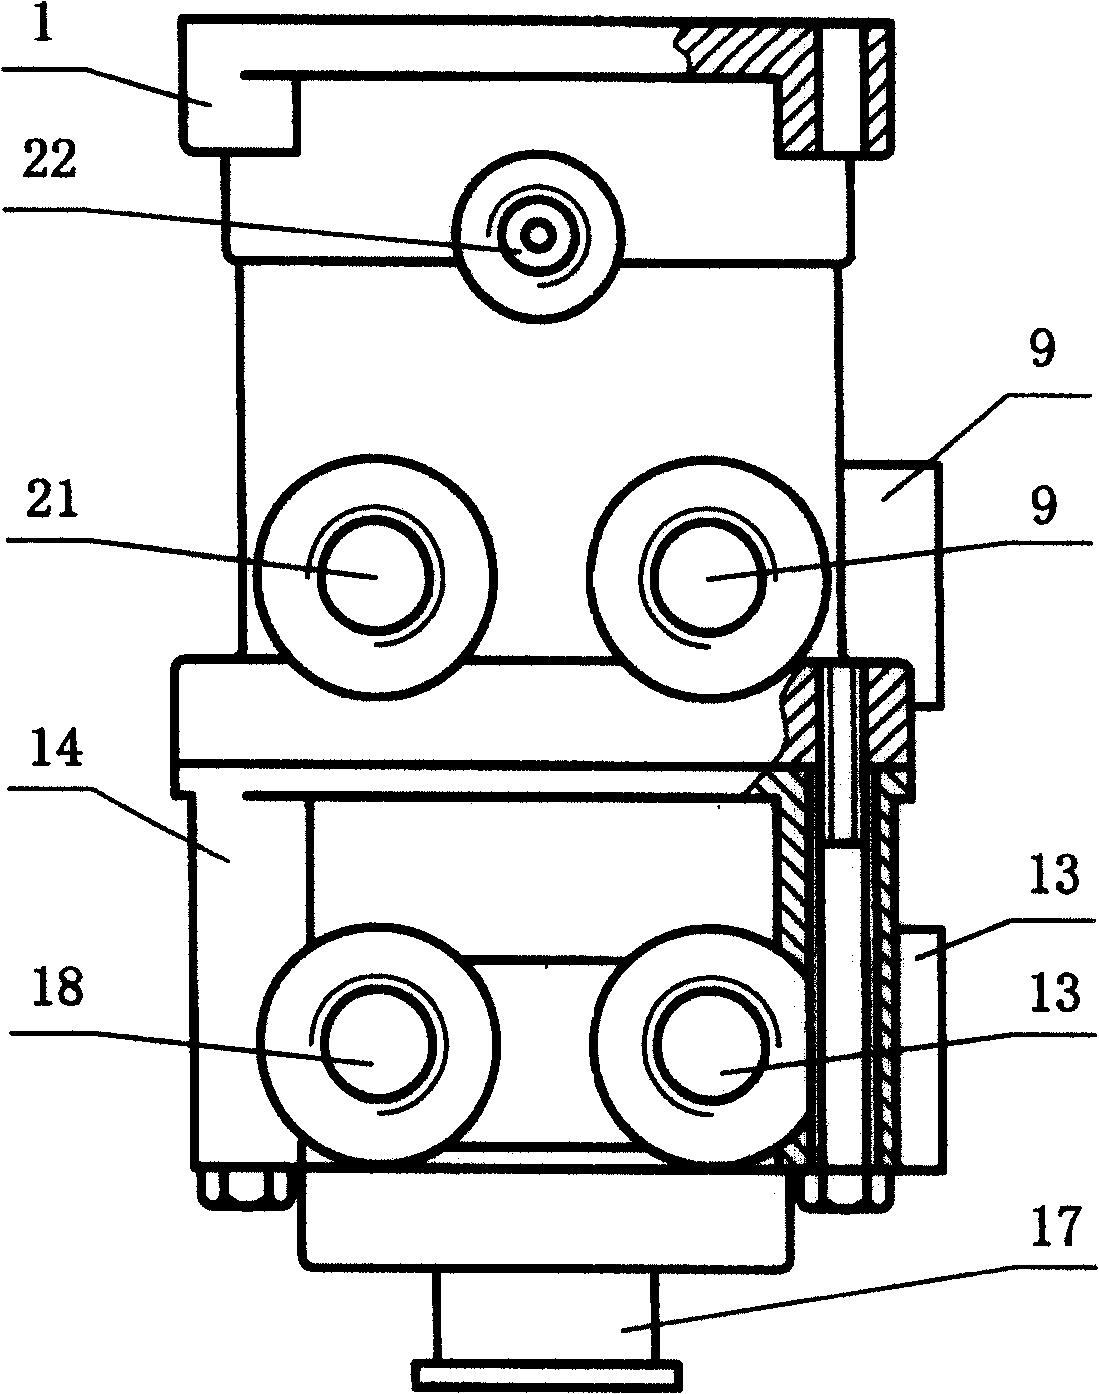 Three-inlet and multi-exit two-stage electromagnetic booster braking general pump